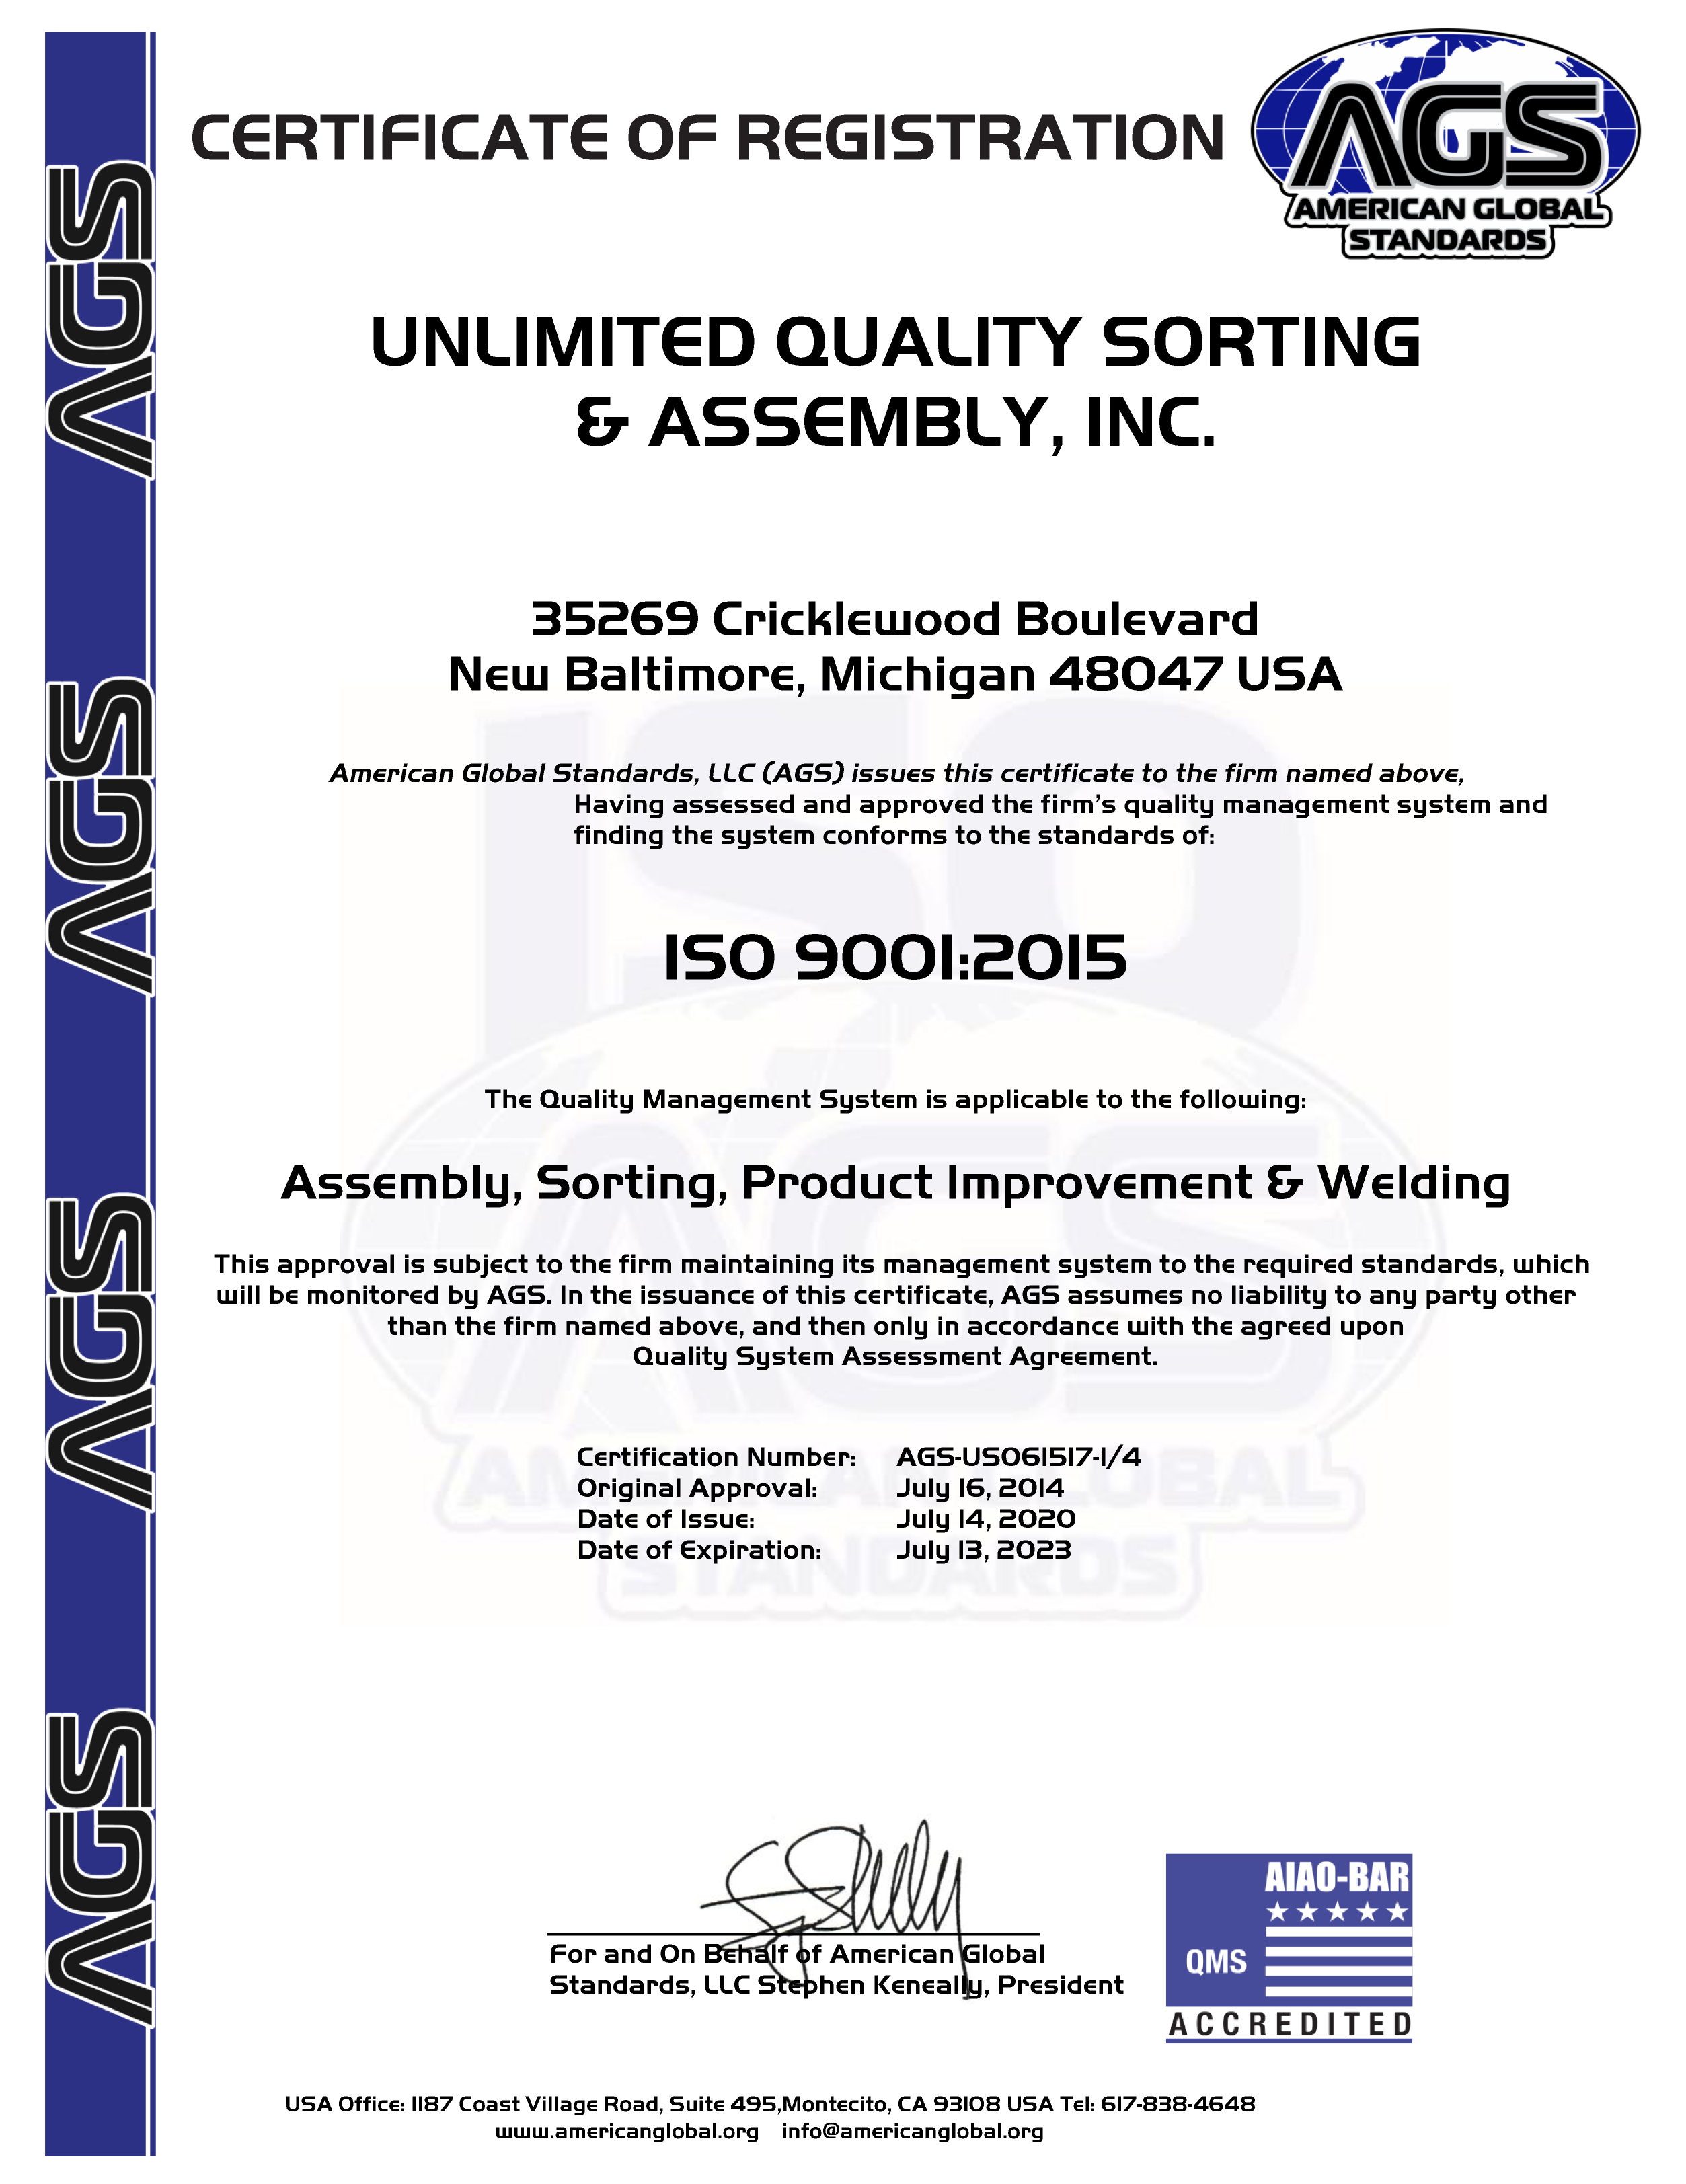 Unlimited QSA ISO Registration Certificate